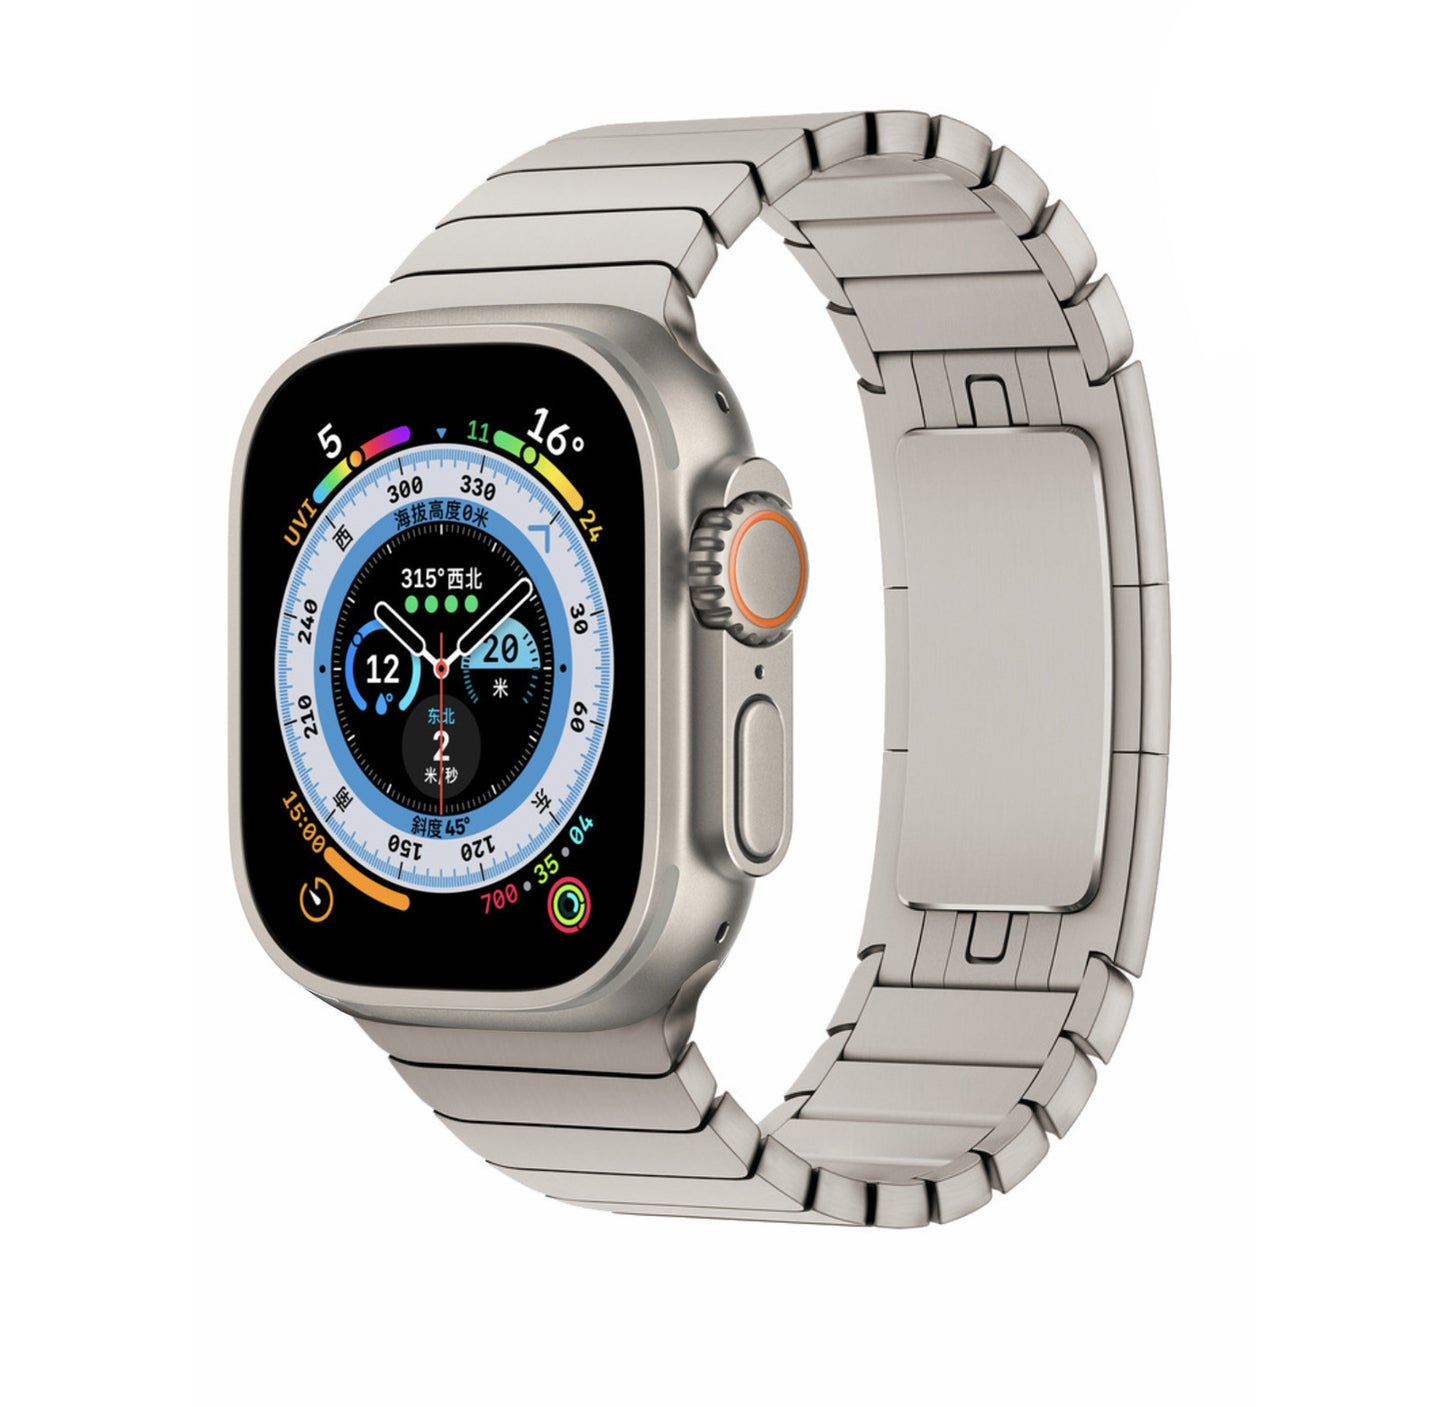 Original Buckle Suitable For Apple Watch Iwatch9 Metal Stainless Steel Applewatch6/5se Stainless Steel Strap